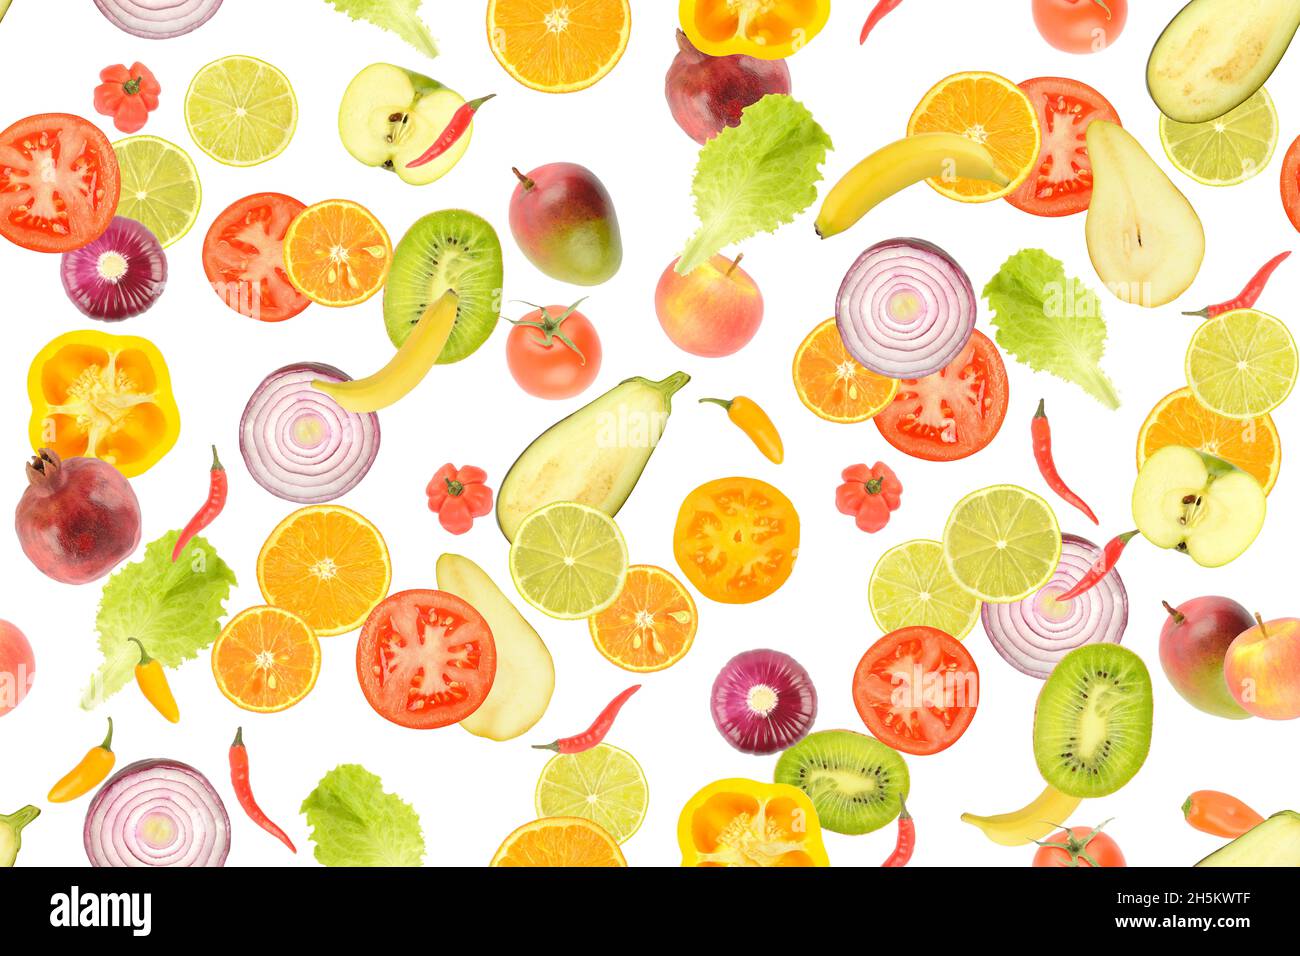 Seamless pattern of fresh juicy vegetables and fruits useful for health isolated on white background. Stock Photo